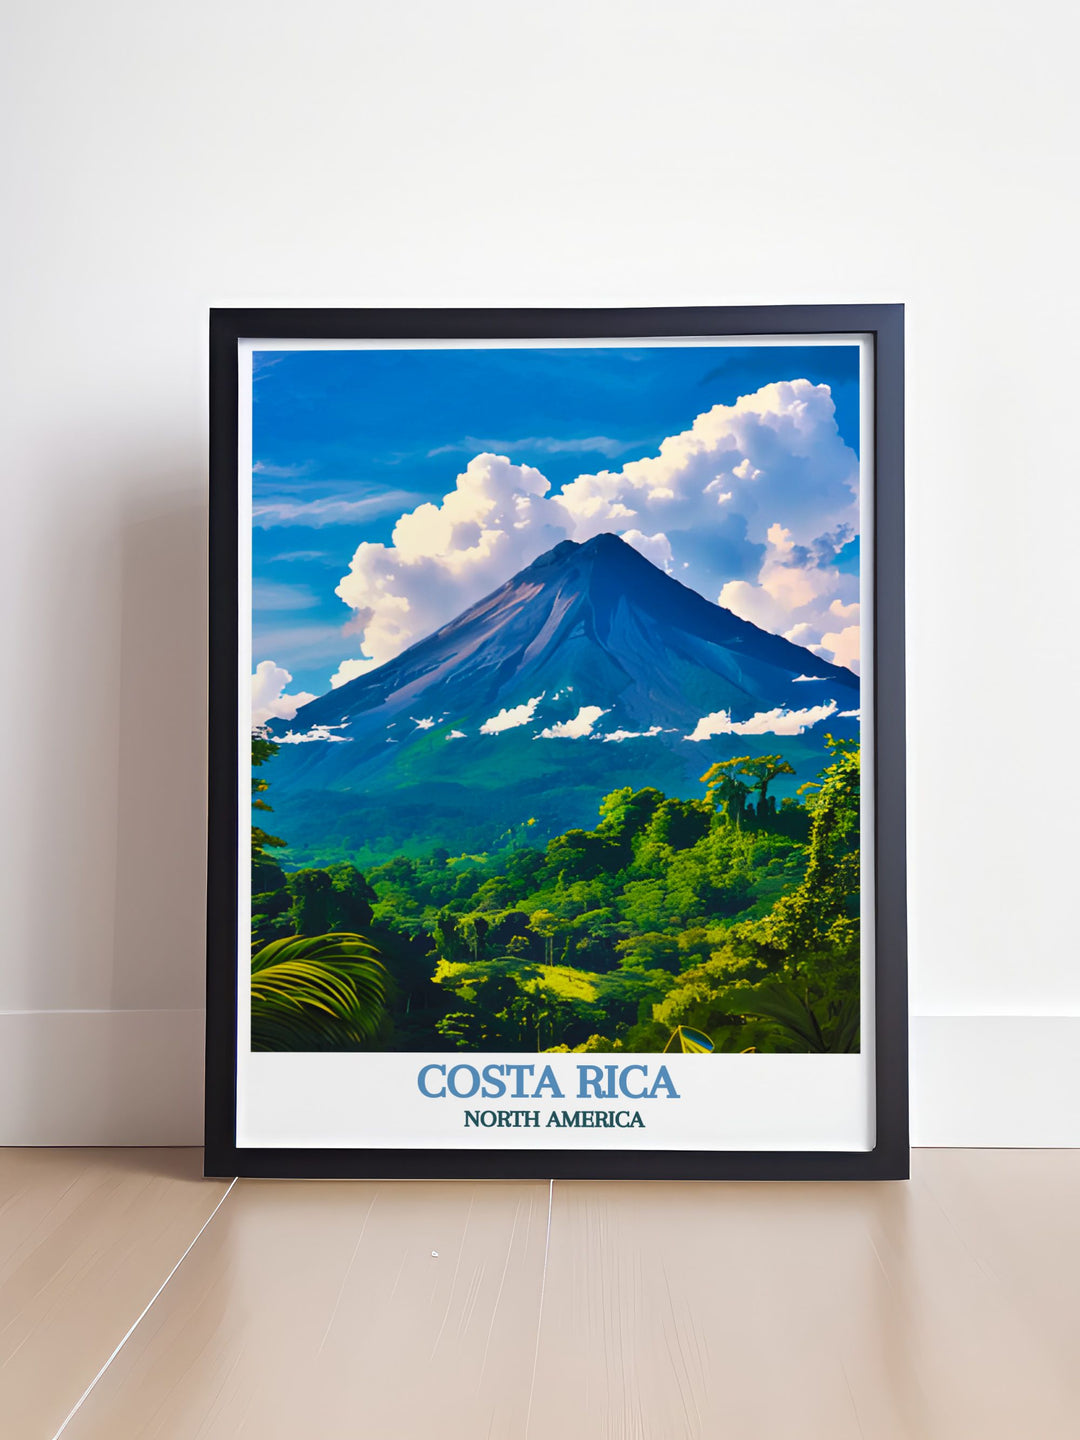 Bring the essence of Costa Rica into your home with this beautiful travel poster of Arenal Volcano, showcasing its lush rainforest and clear waters, perfect for adding a touch of tropical beauty to your space.